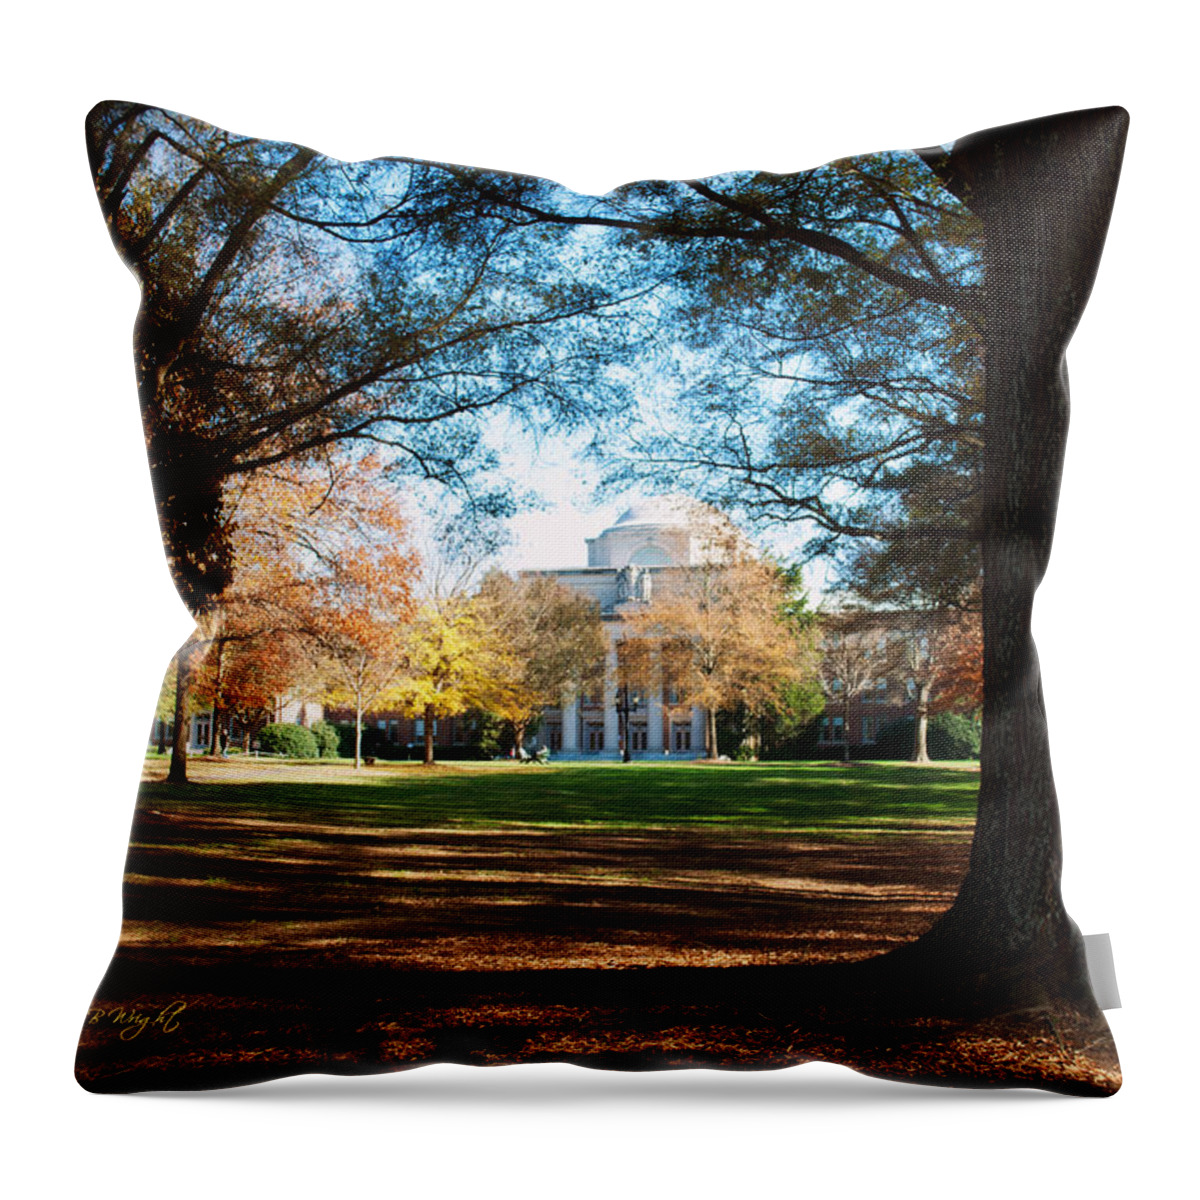 Art Throw Pillow featuring the photograph Chambers Building - Davidson College by Paulette B Wright